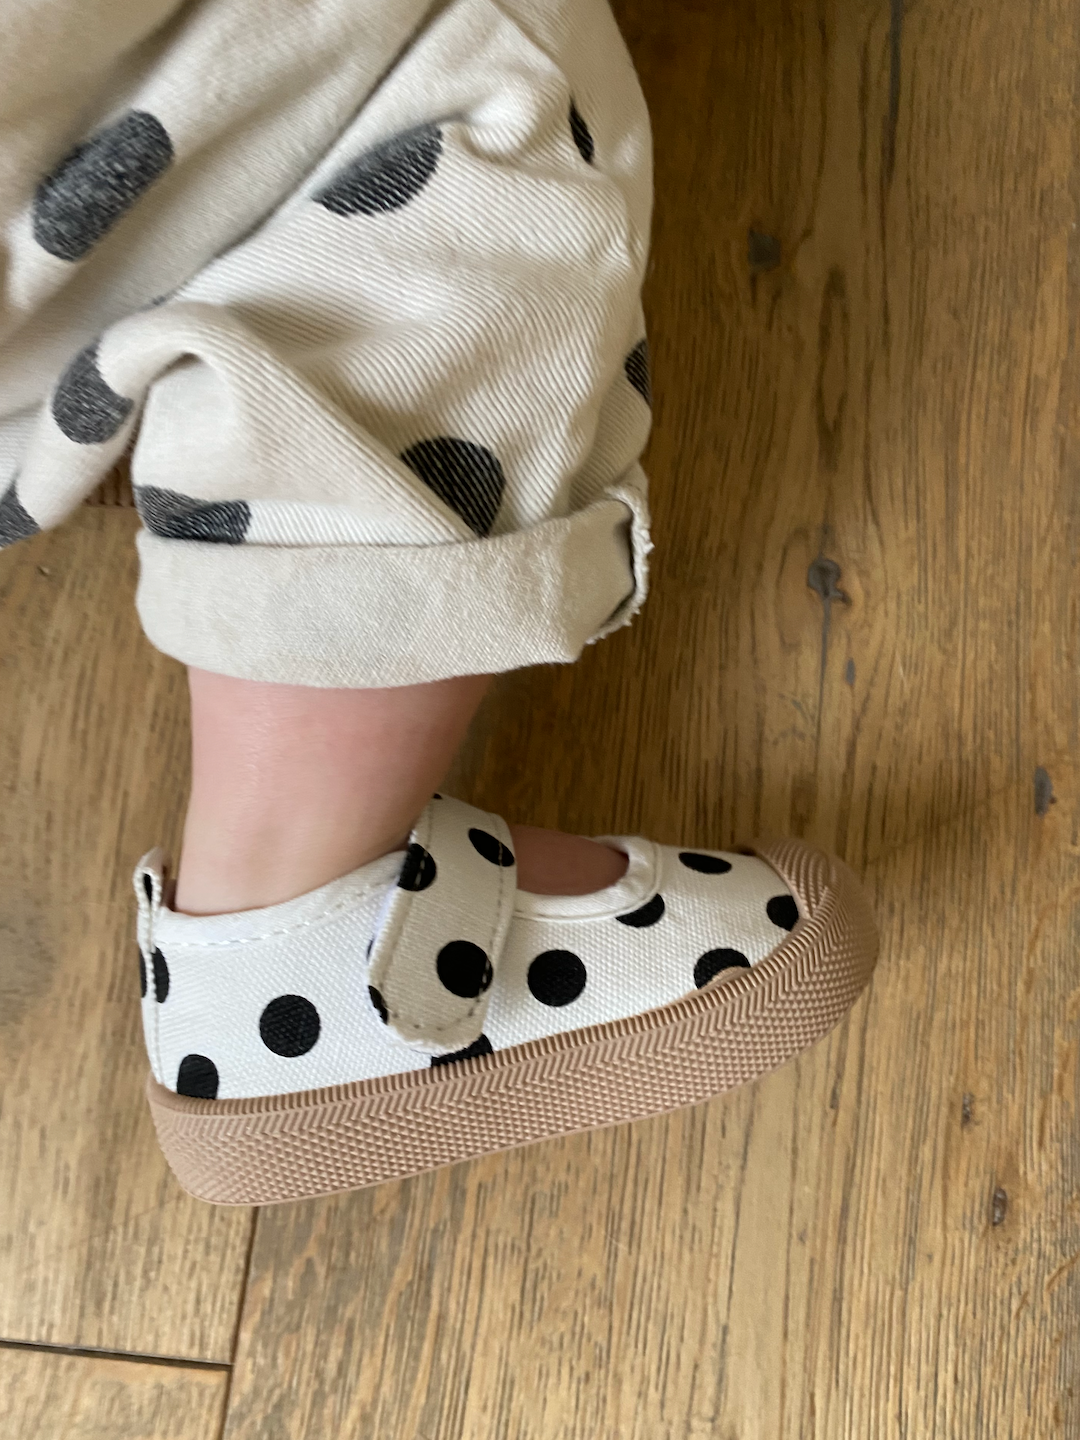 A toddler wearing mary jane sneakers with black dots on a white background